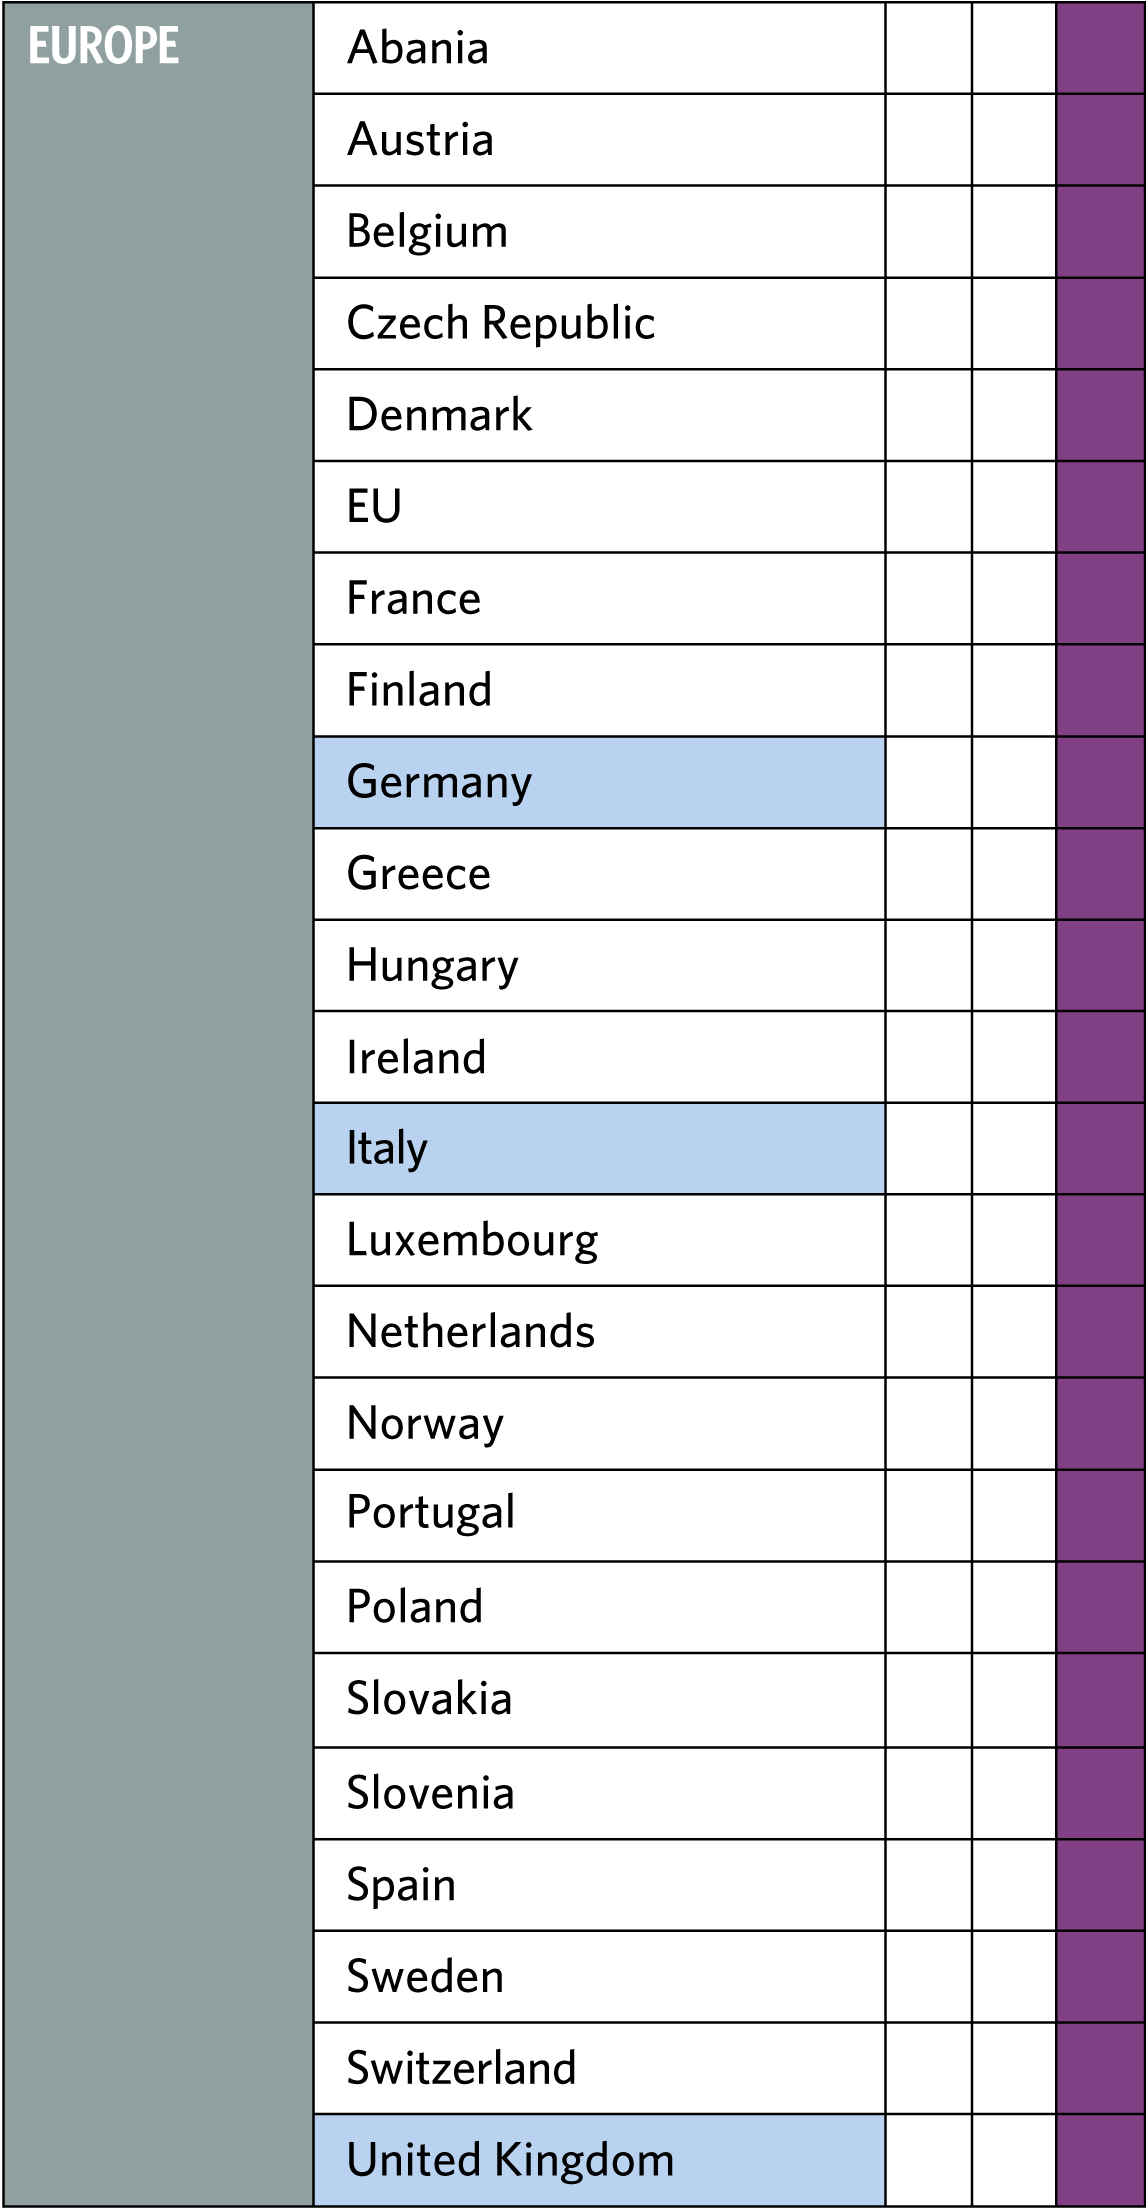 Europe table